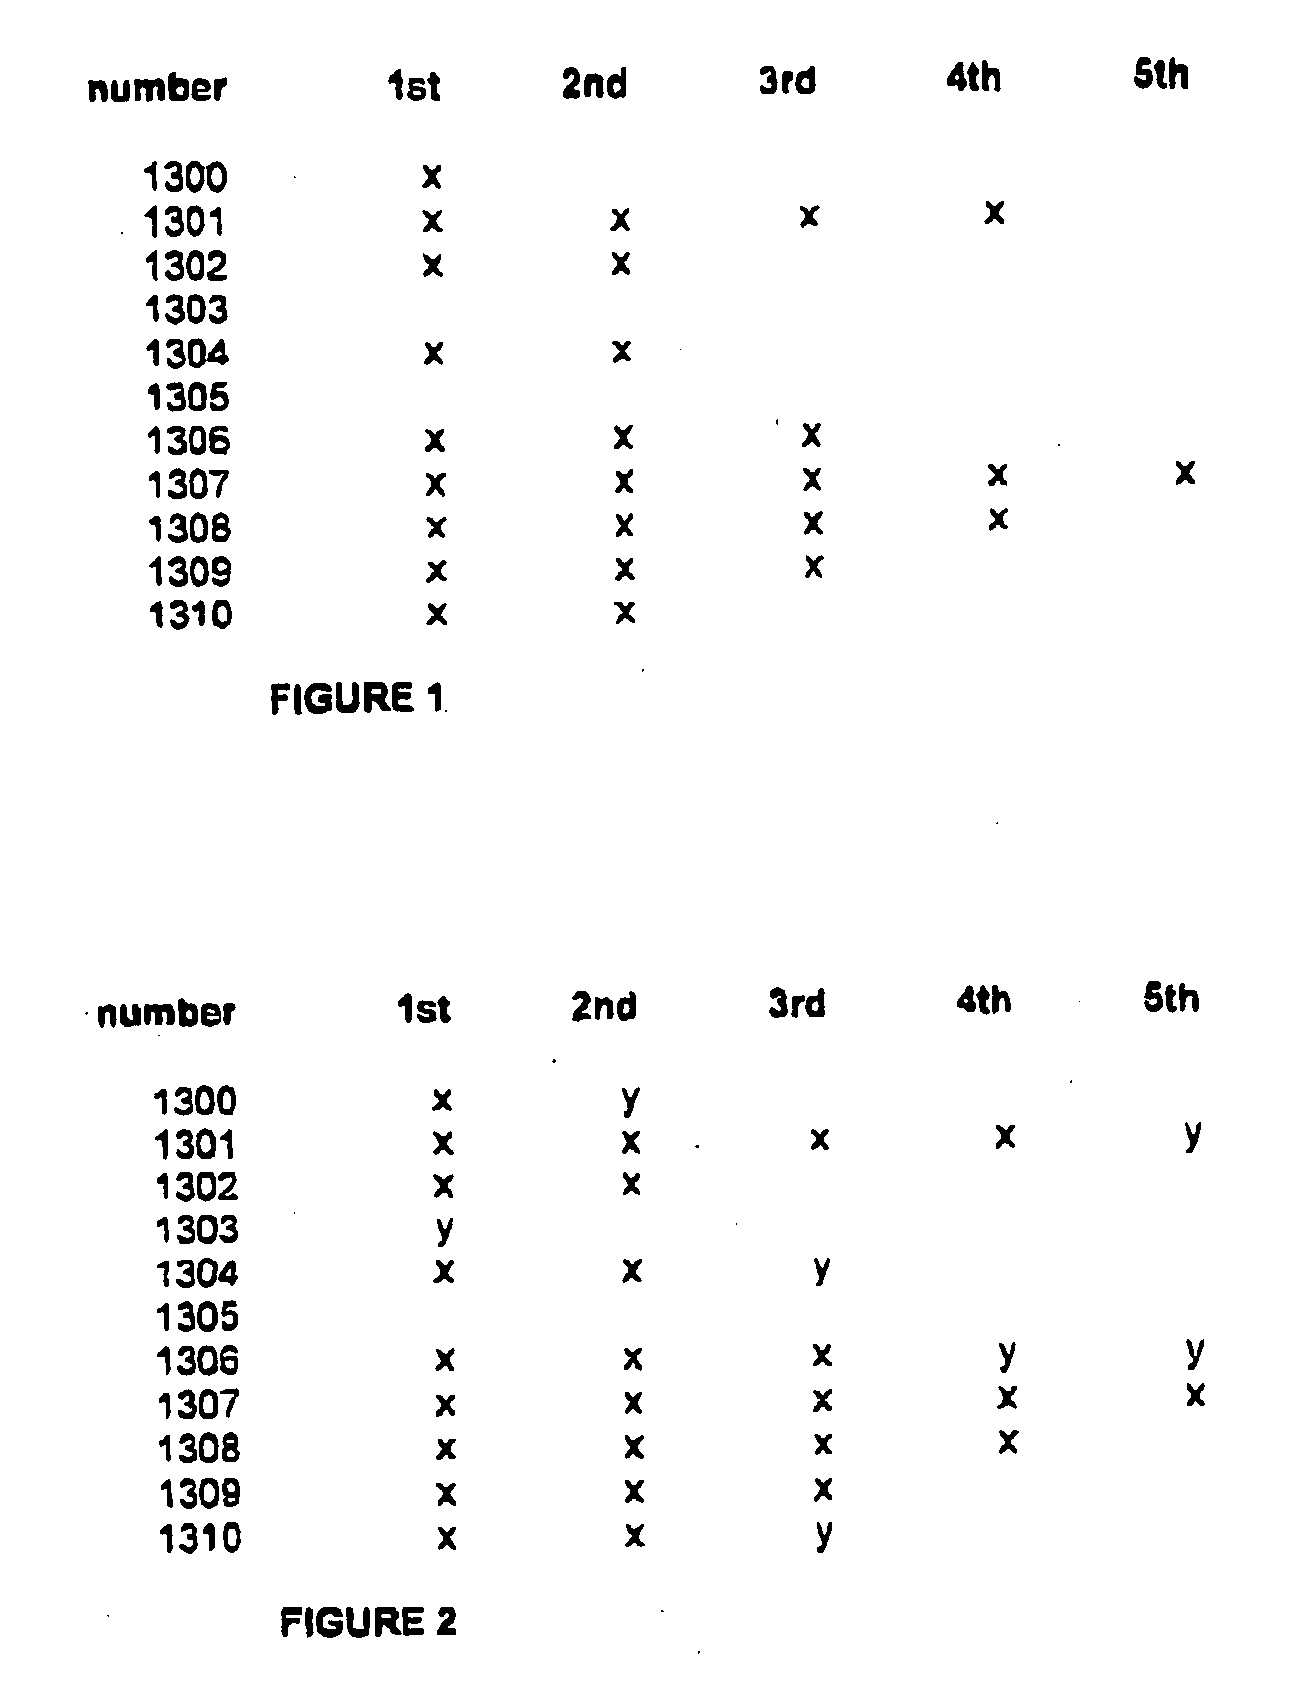 Lottery system